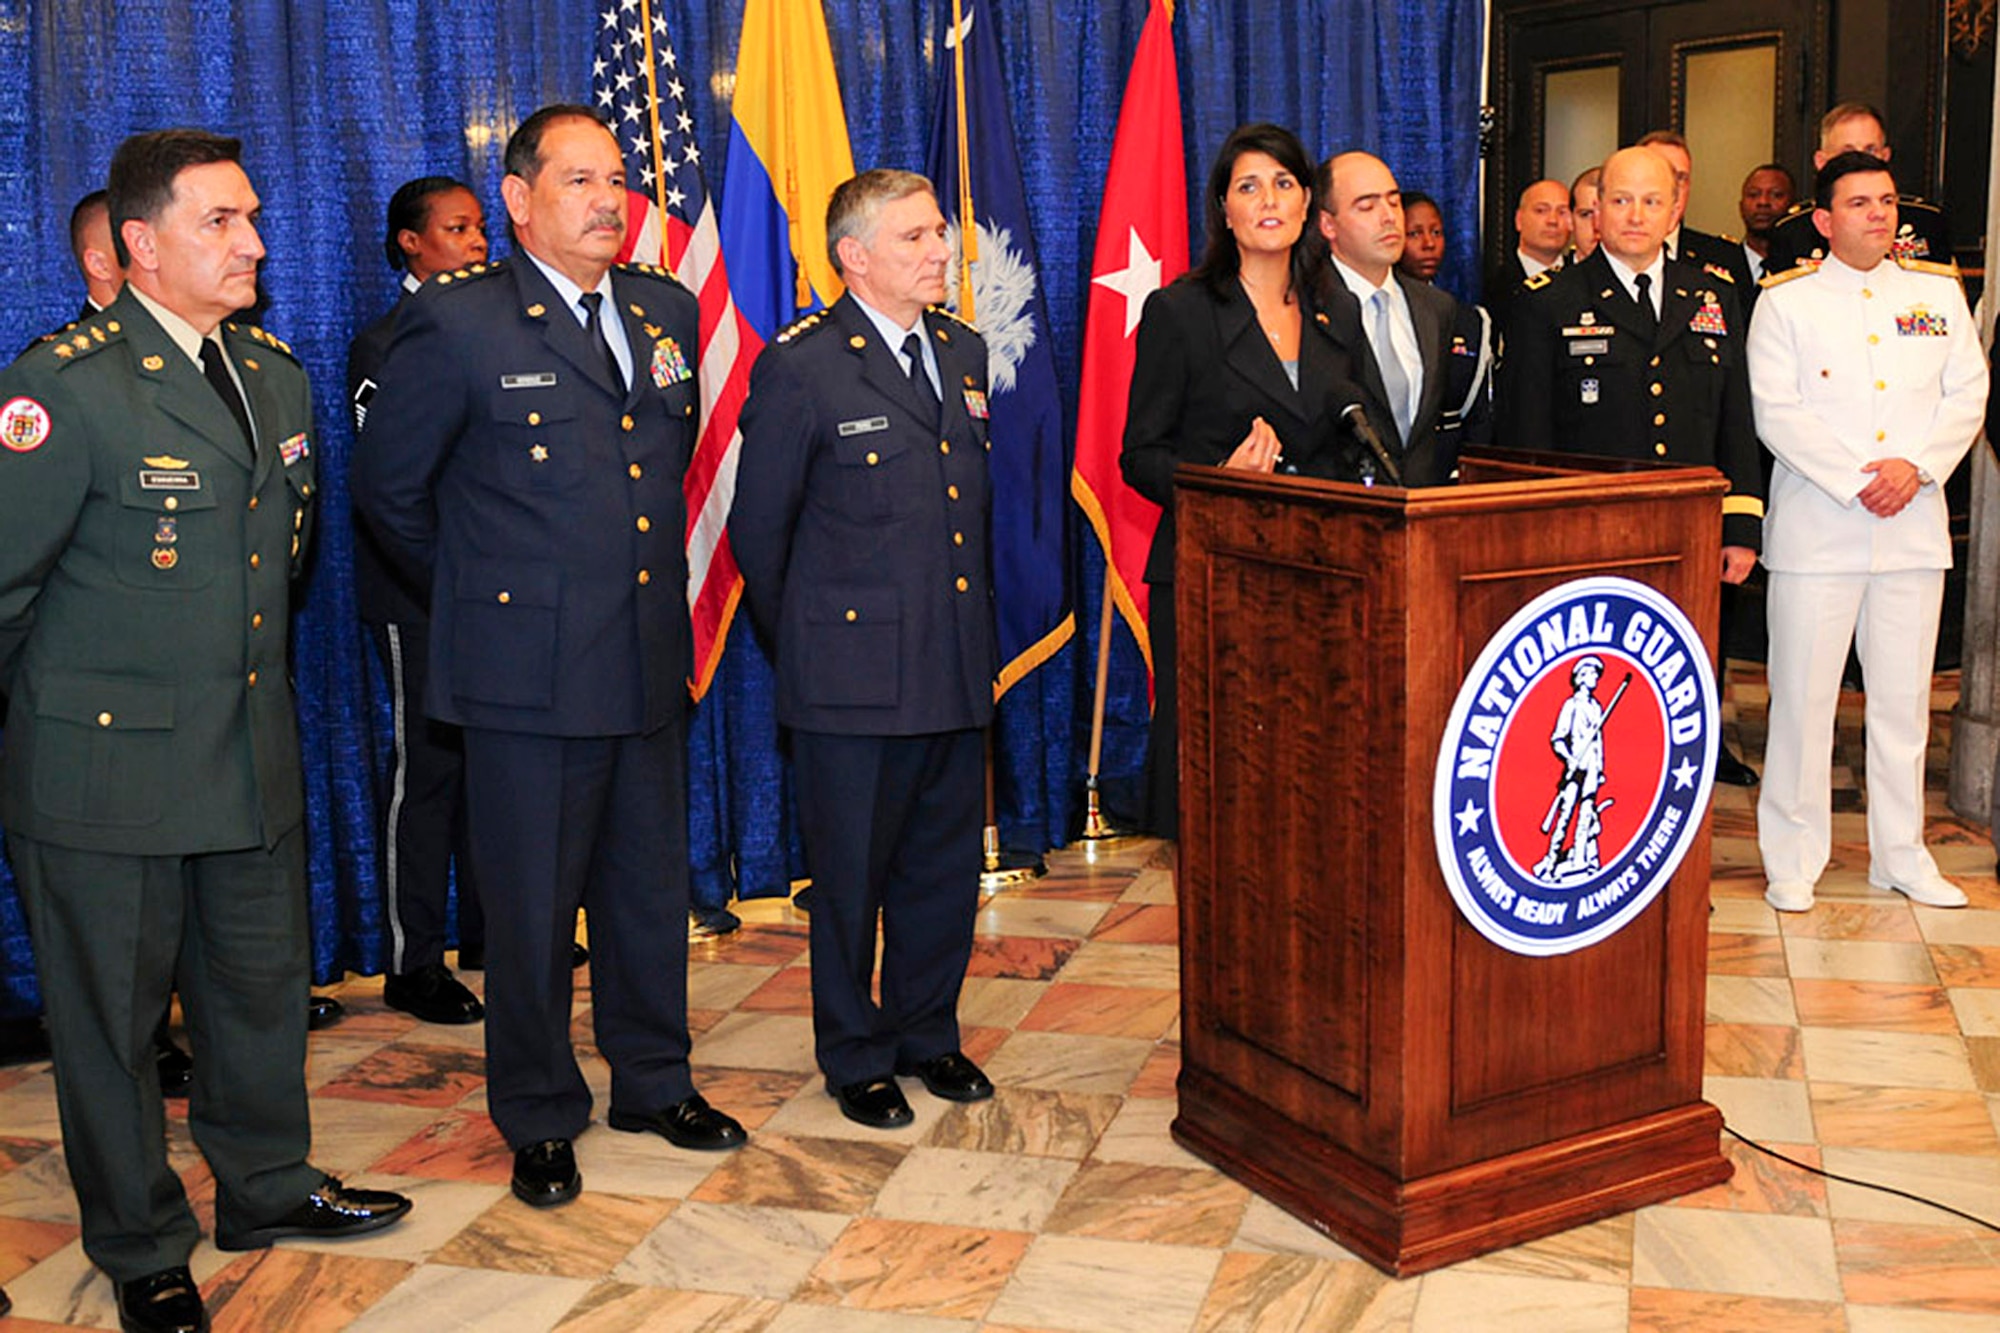 South Carolina Governor Nikki Haley and Maj. Gen. Robert E. Livingston Jr., the adjutant general for South Carolina National Guard, announce the commencement of South Carolina National Guard's state partnership with the Republic of Colombia July 23, 2012. Colombian Vice Minister of Defense Jorge Enrique Bedoya and Gov. Haley signed the partnership proclamation establishing this historic bilateral relationship prior to the press conference. (U.S. Army photo by Staff Sgt. Tracci Dorgan) RELEASED